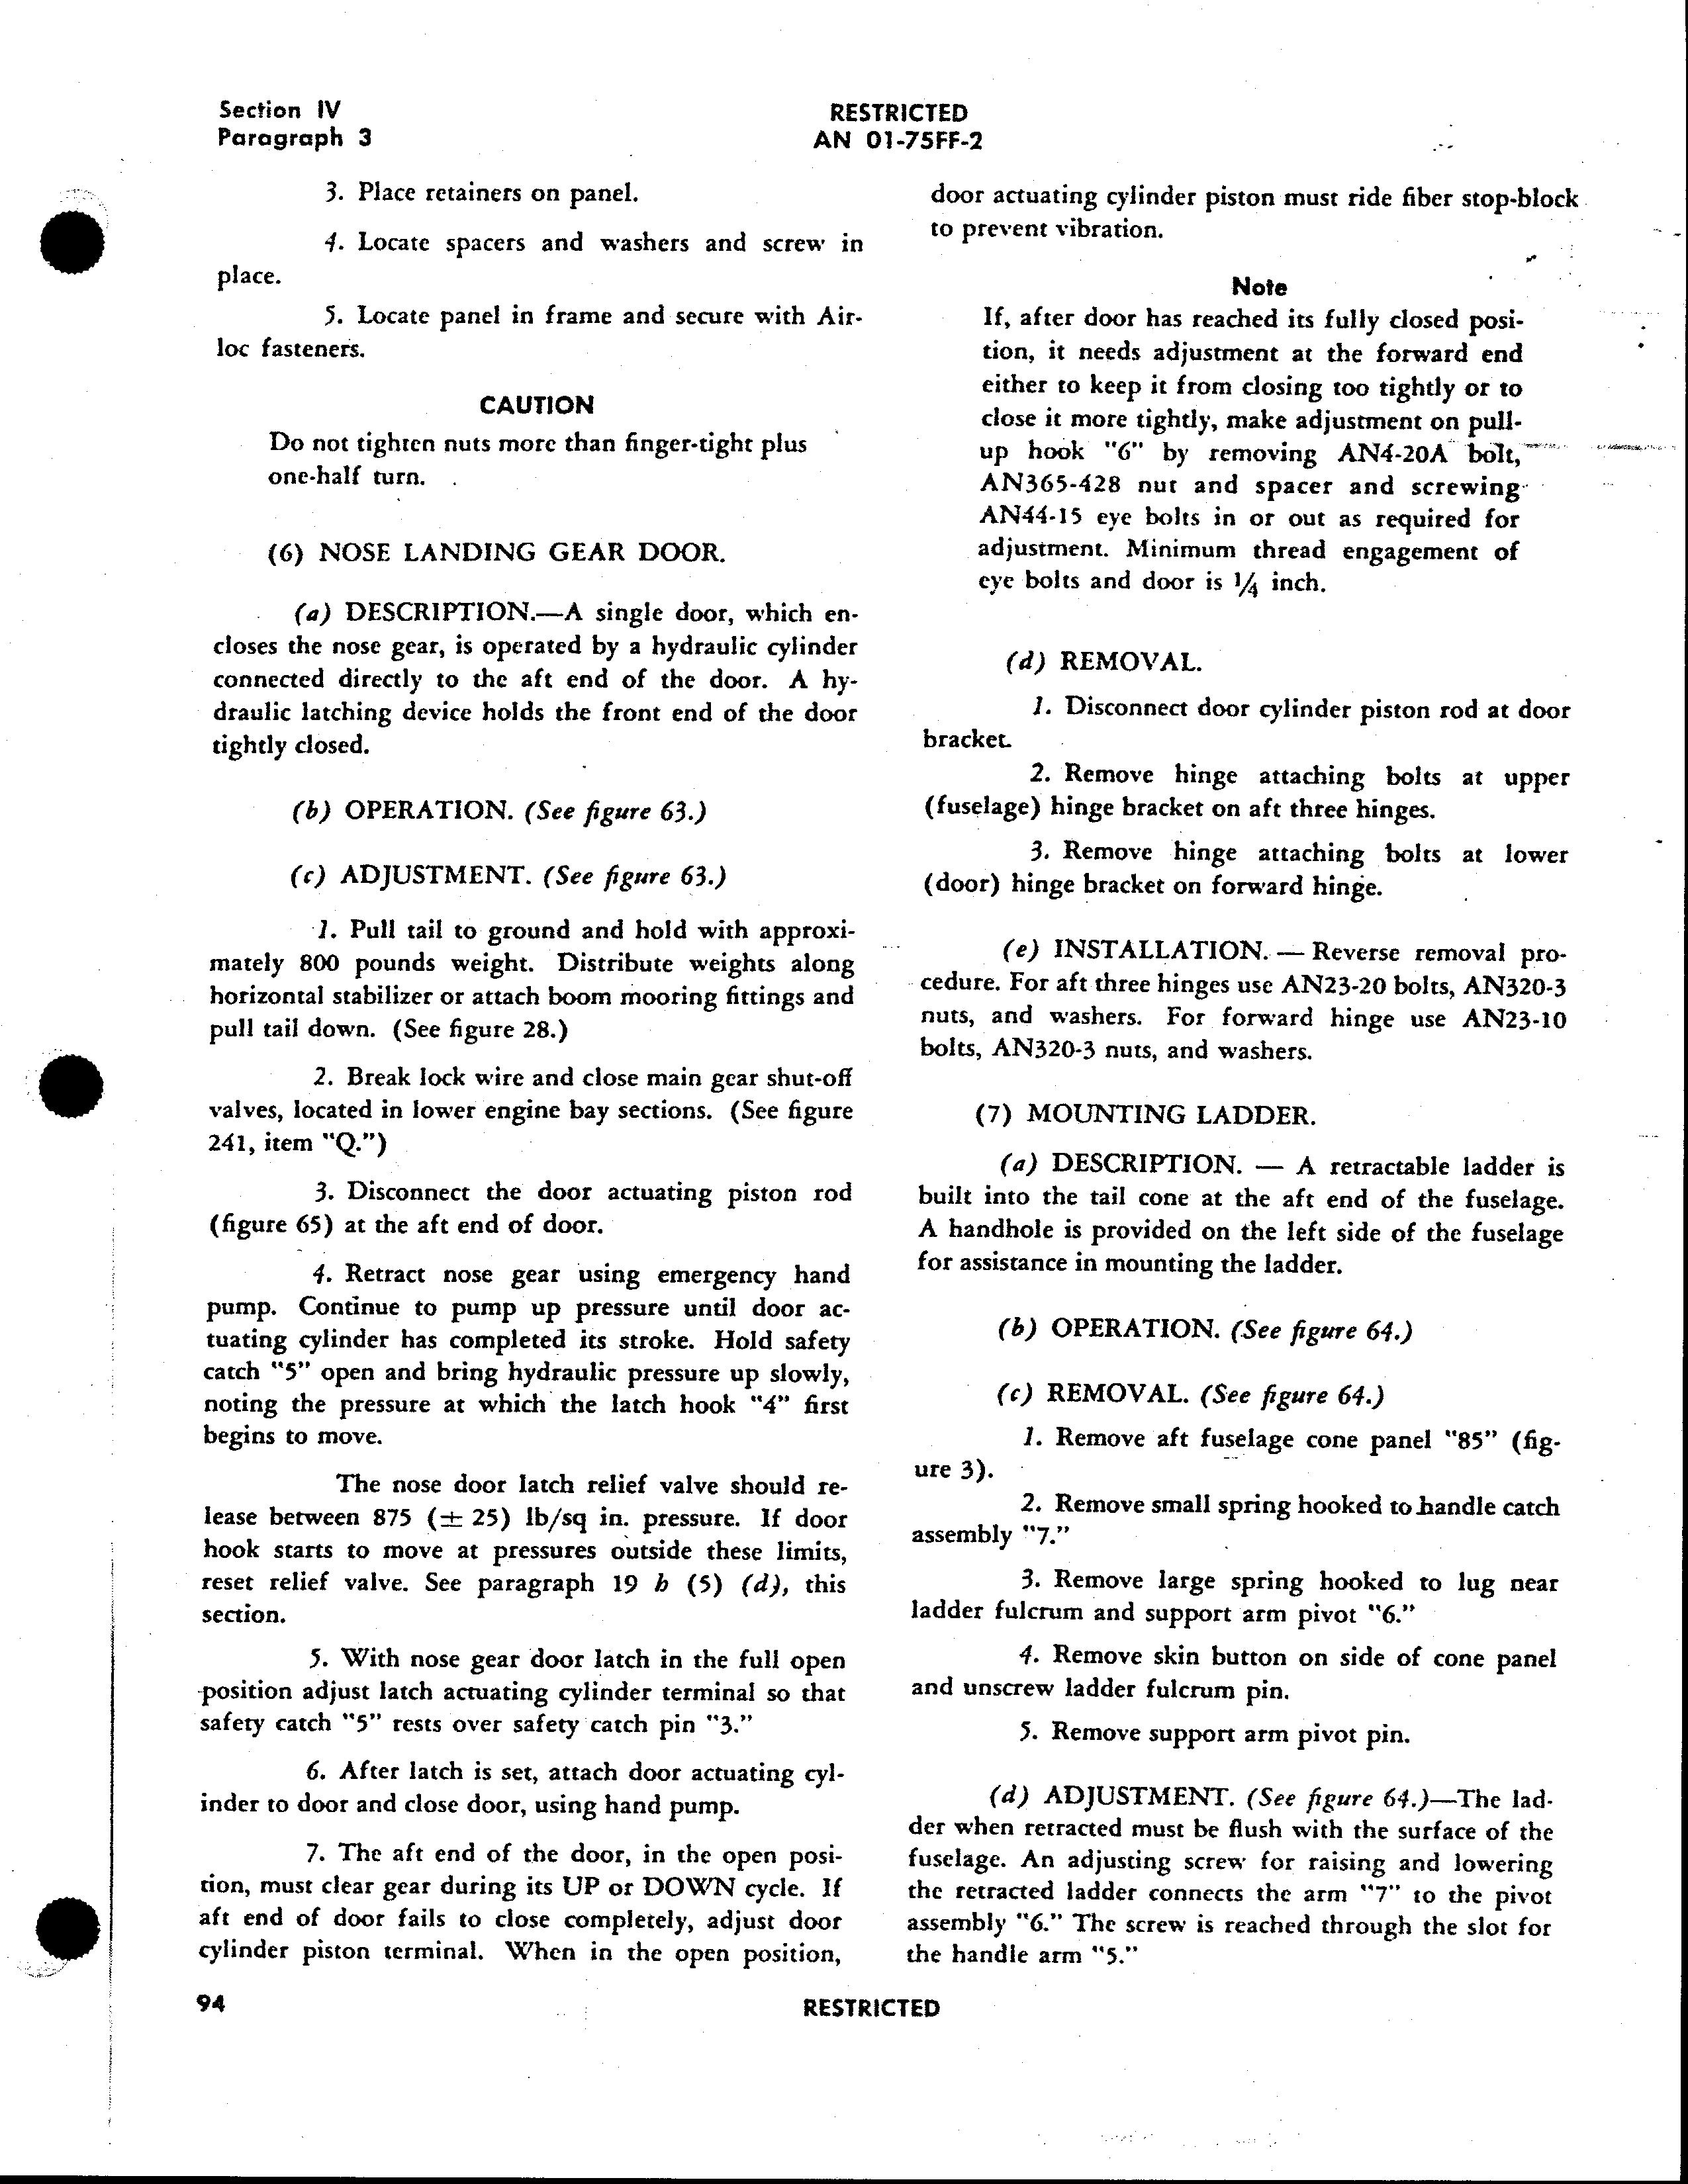 Sample page 105 from AirCorps Library document: Erection & Maintenance Manual - P-38